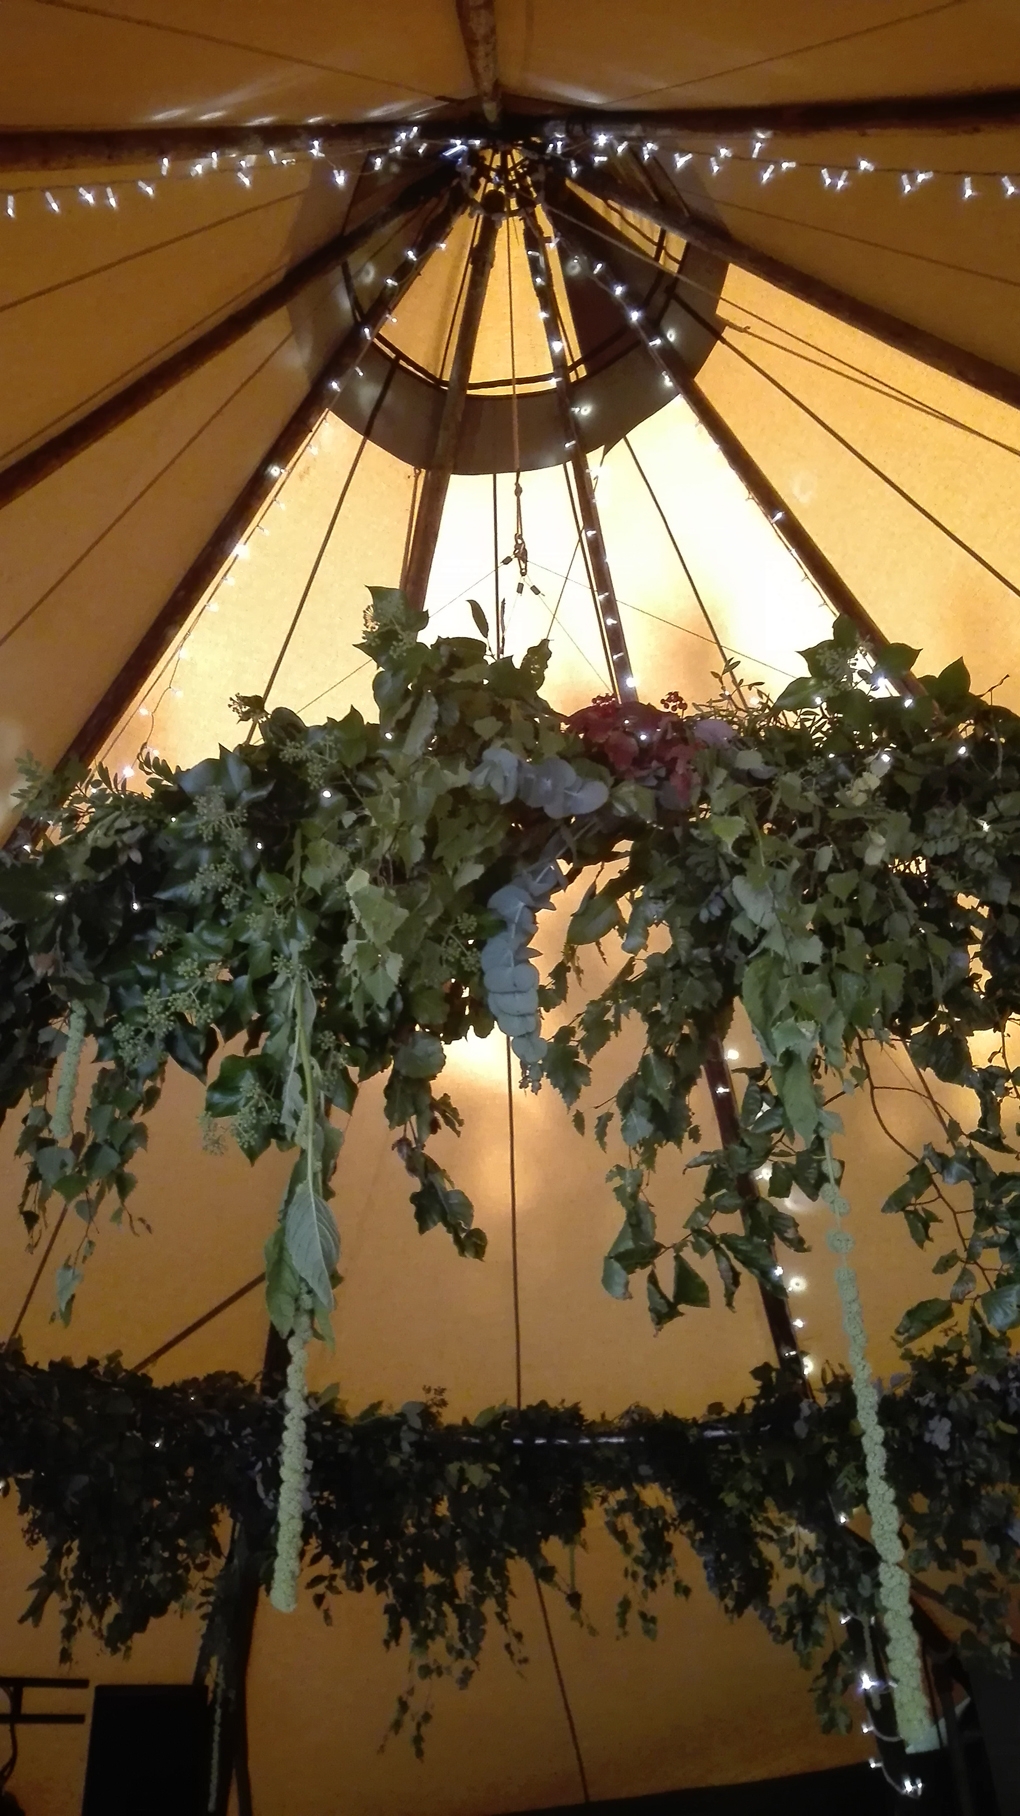 A circle of pretty foliage hangs in the peak of a yurt tent. The picture is taken from below.